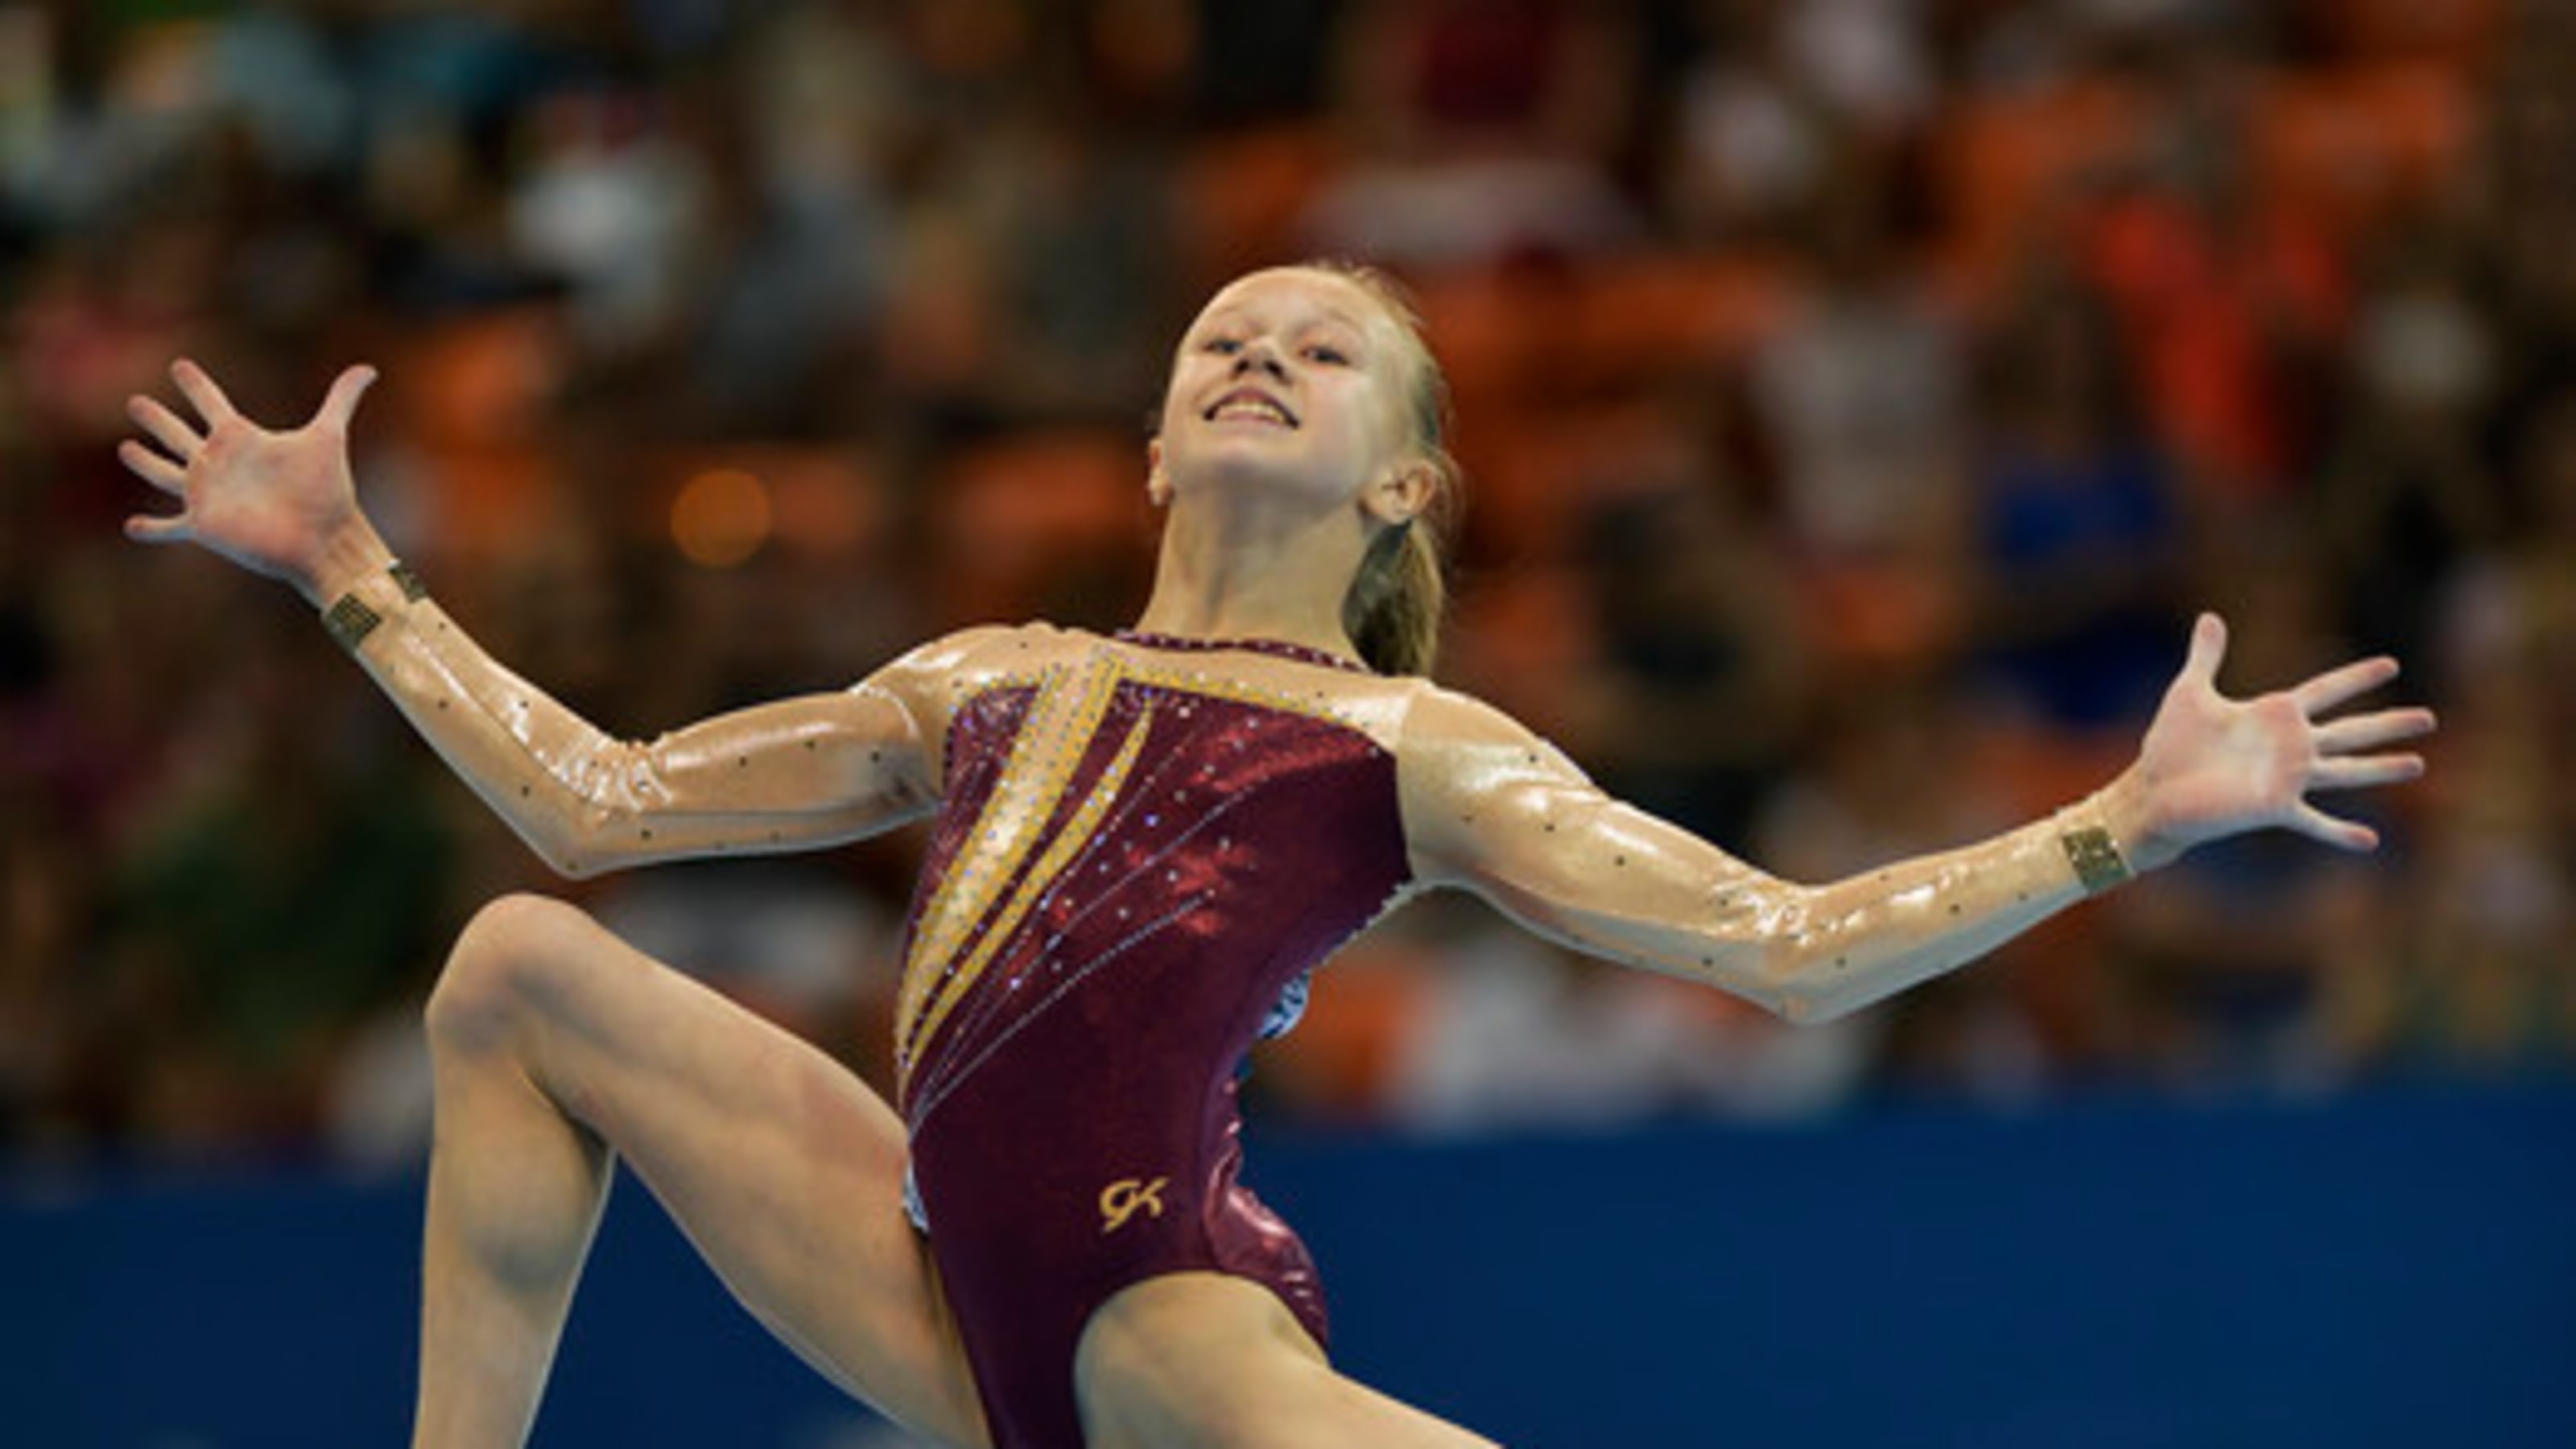 Junior World Gymnastics Champ Viktoria Listunova Doesn T Want To Miss Out On Unexpected Olympic Chance